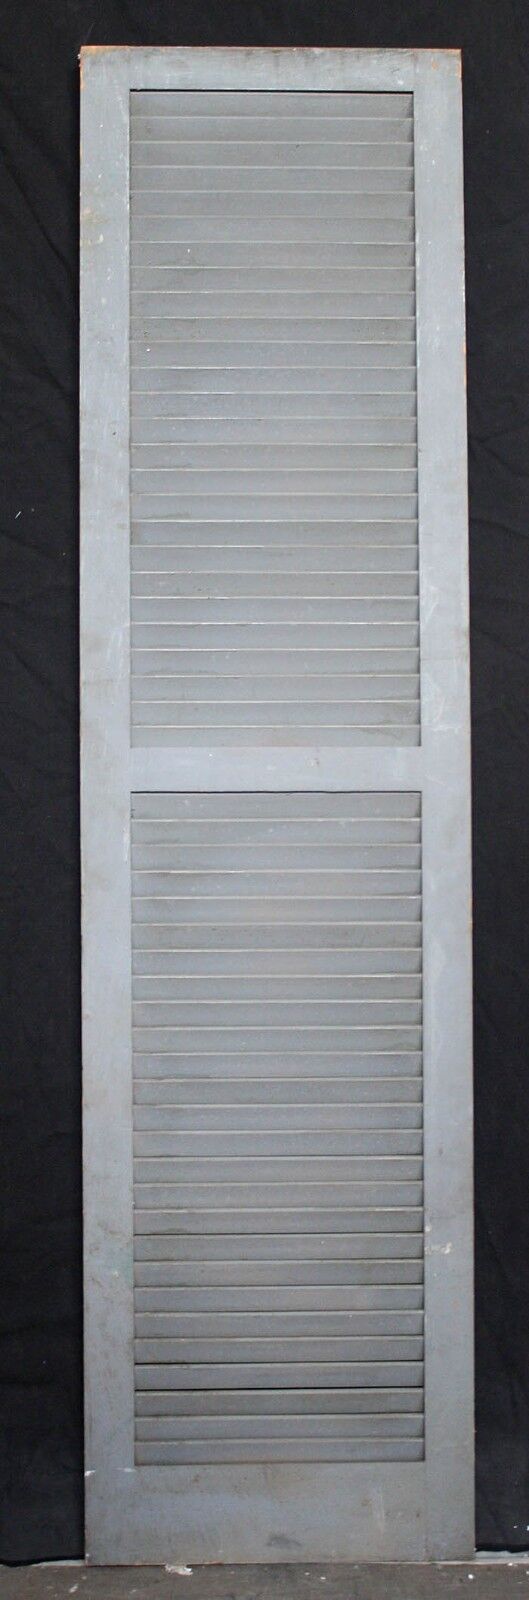 17.5"x68" Vintage Antique Old Reclaimed Salvaged Wood Wooden Window Shutter Cabinet Pantry Louver Door